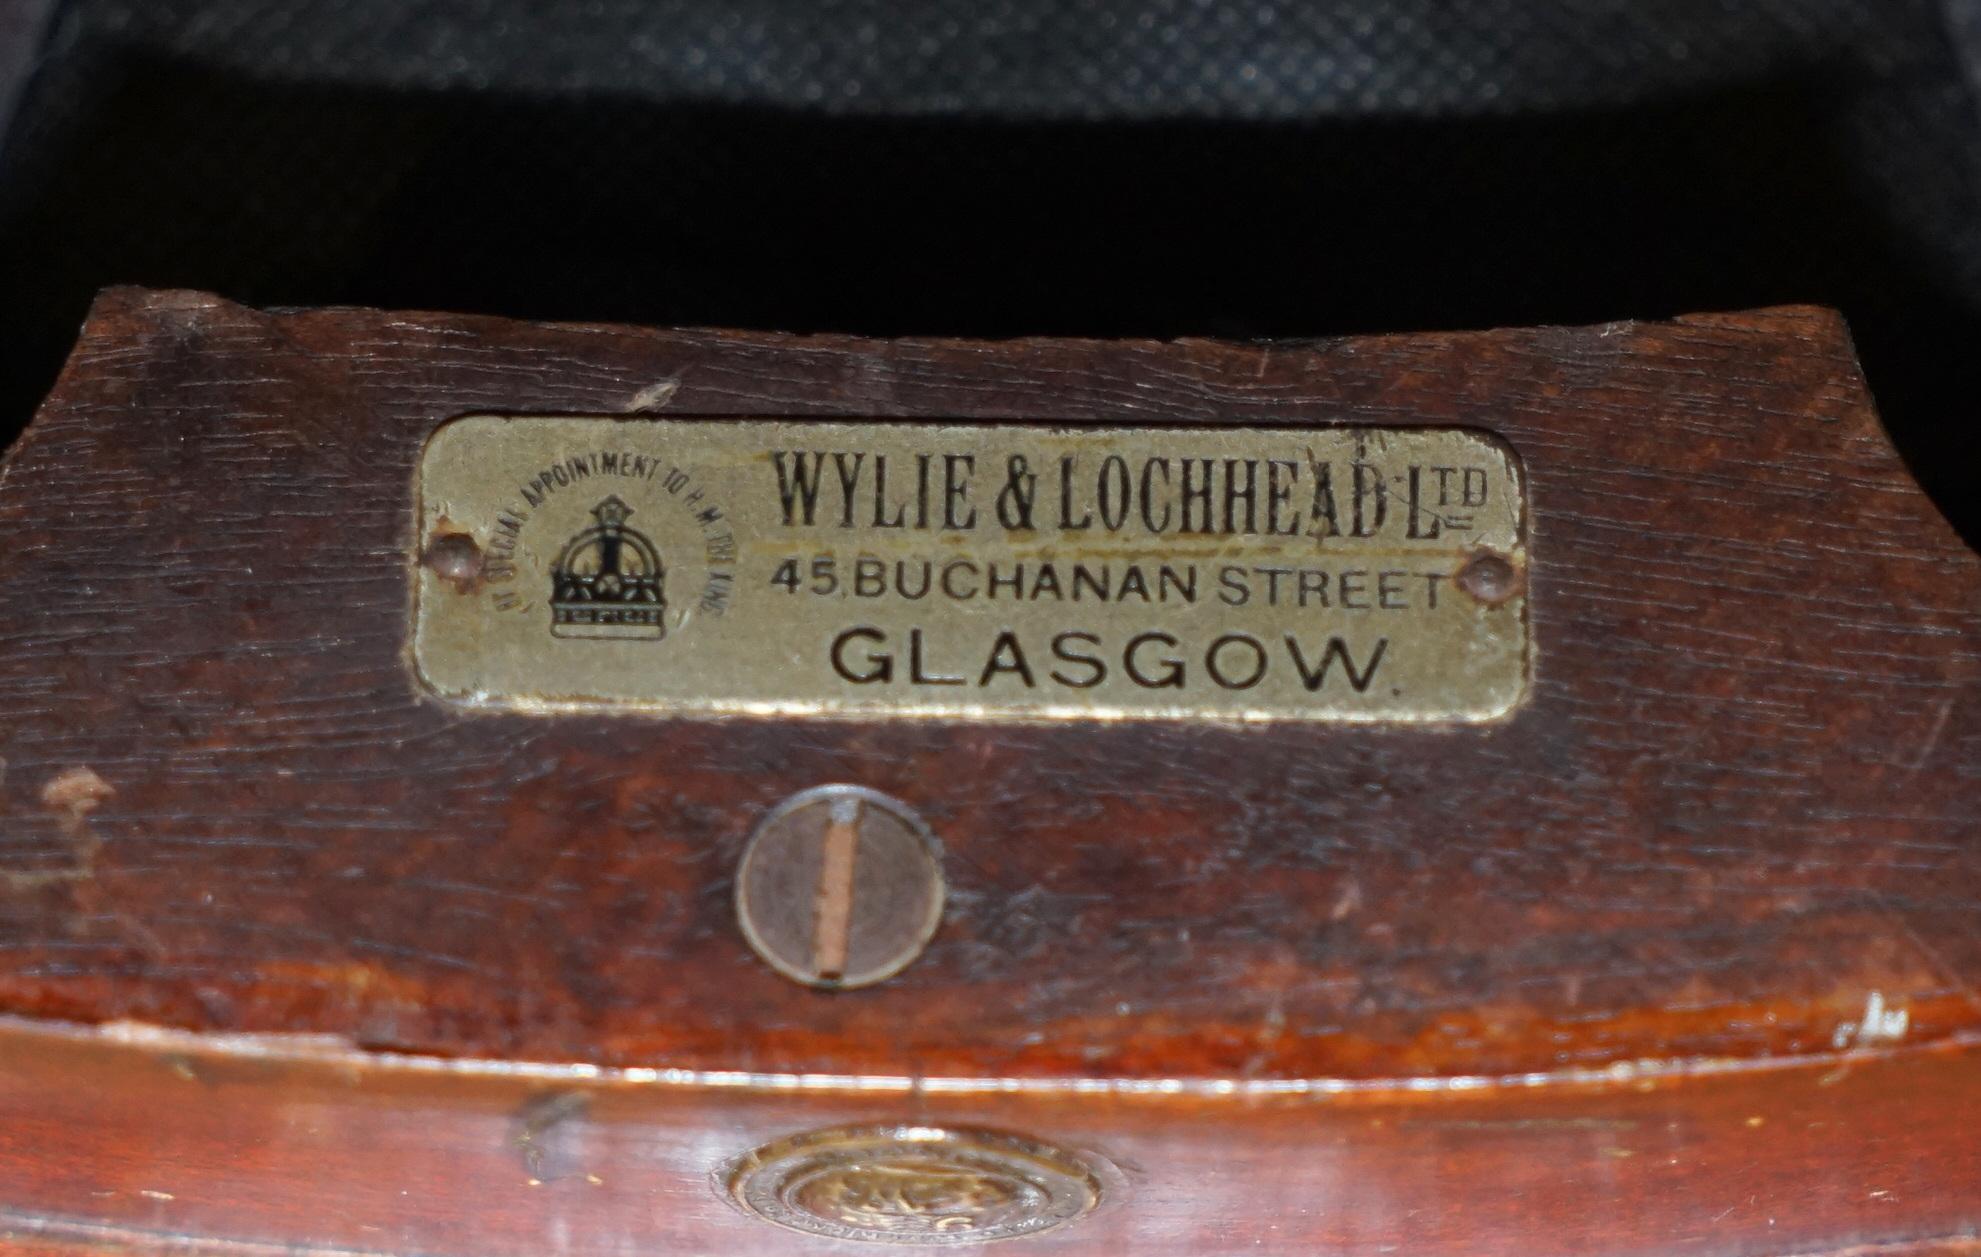 We are delighted to offer for sale this very rare and highly collectable fully stamped Oxblood leather captains chair made by Wylie & Lochhead LTD by special appointment to H.M The King, circa 1900

A very comfortable and highly coveted office